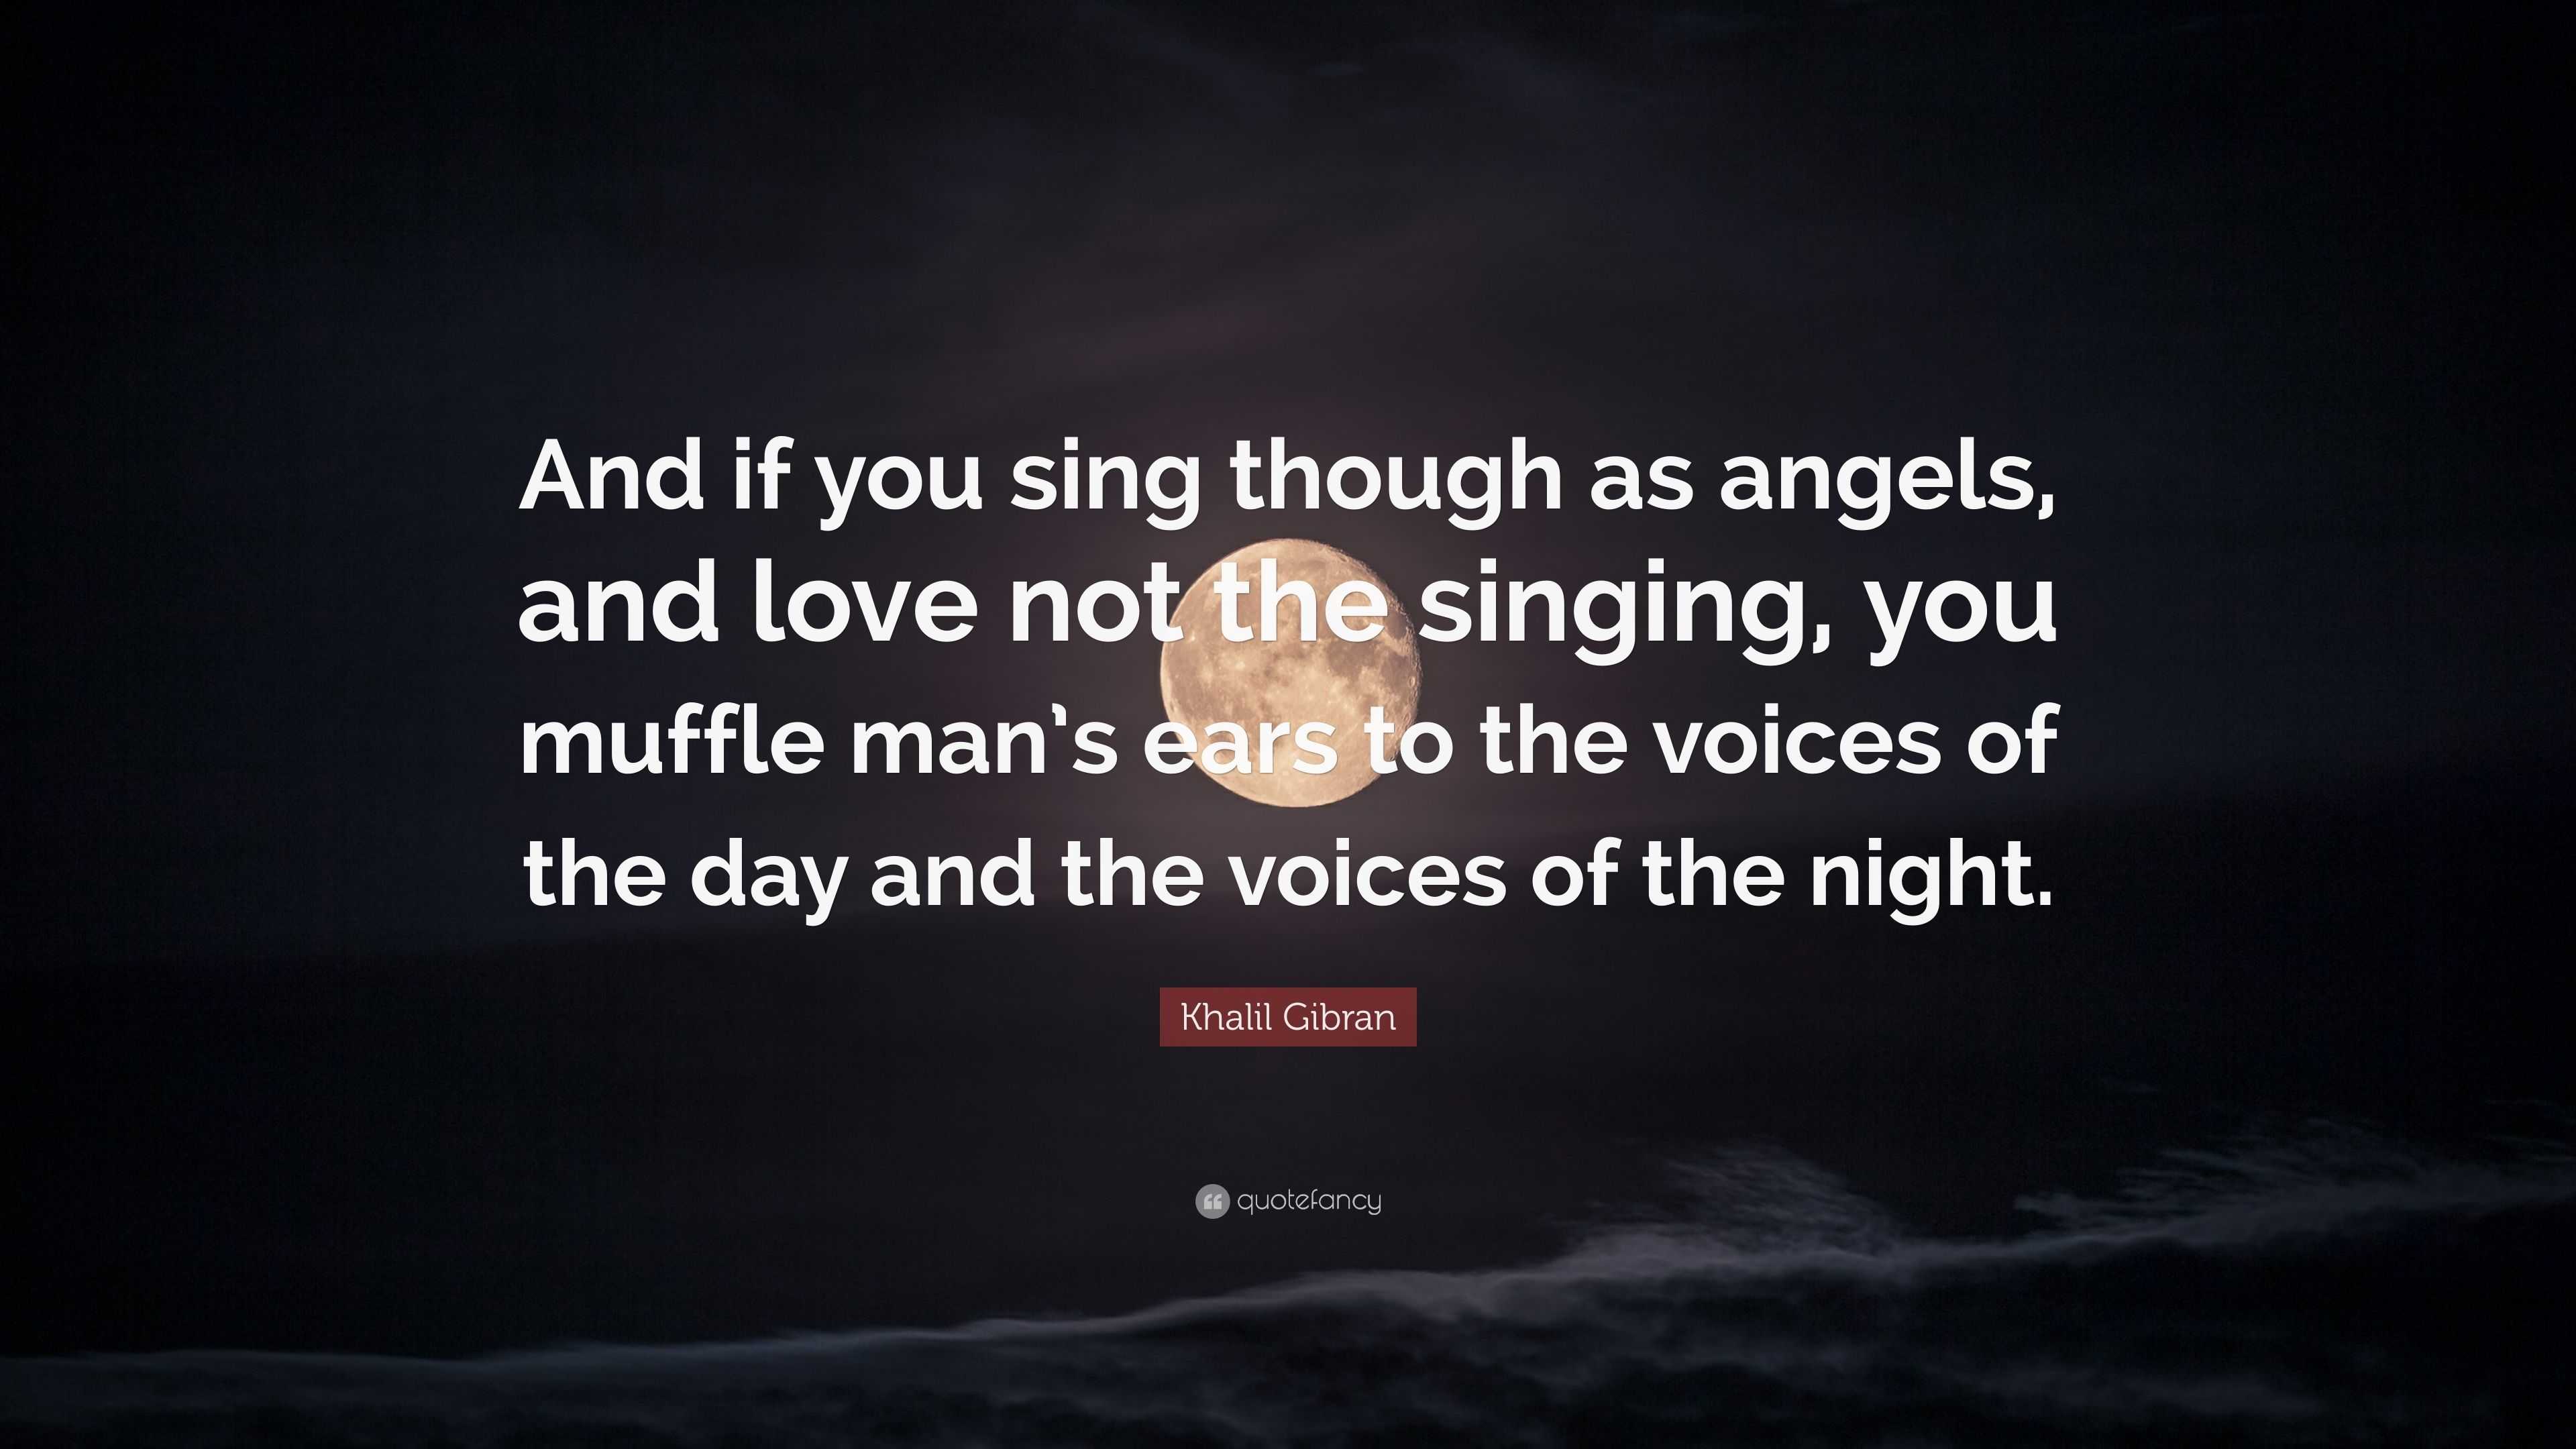 Khalil Gibran Quote: “And if you sing though as angels, and love not the  singing, you muffle man's ears to the voices of the day and the voice”